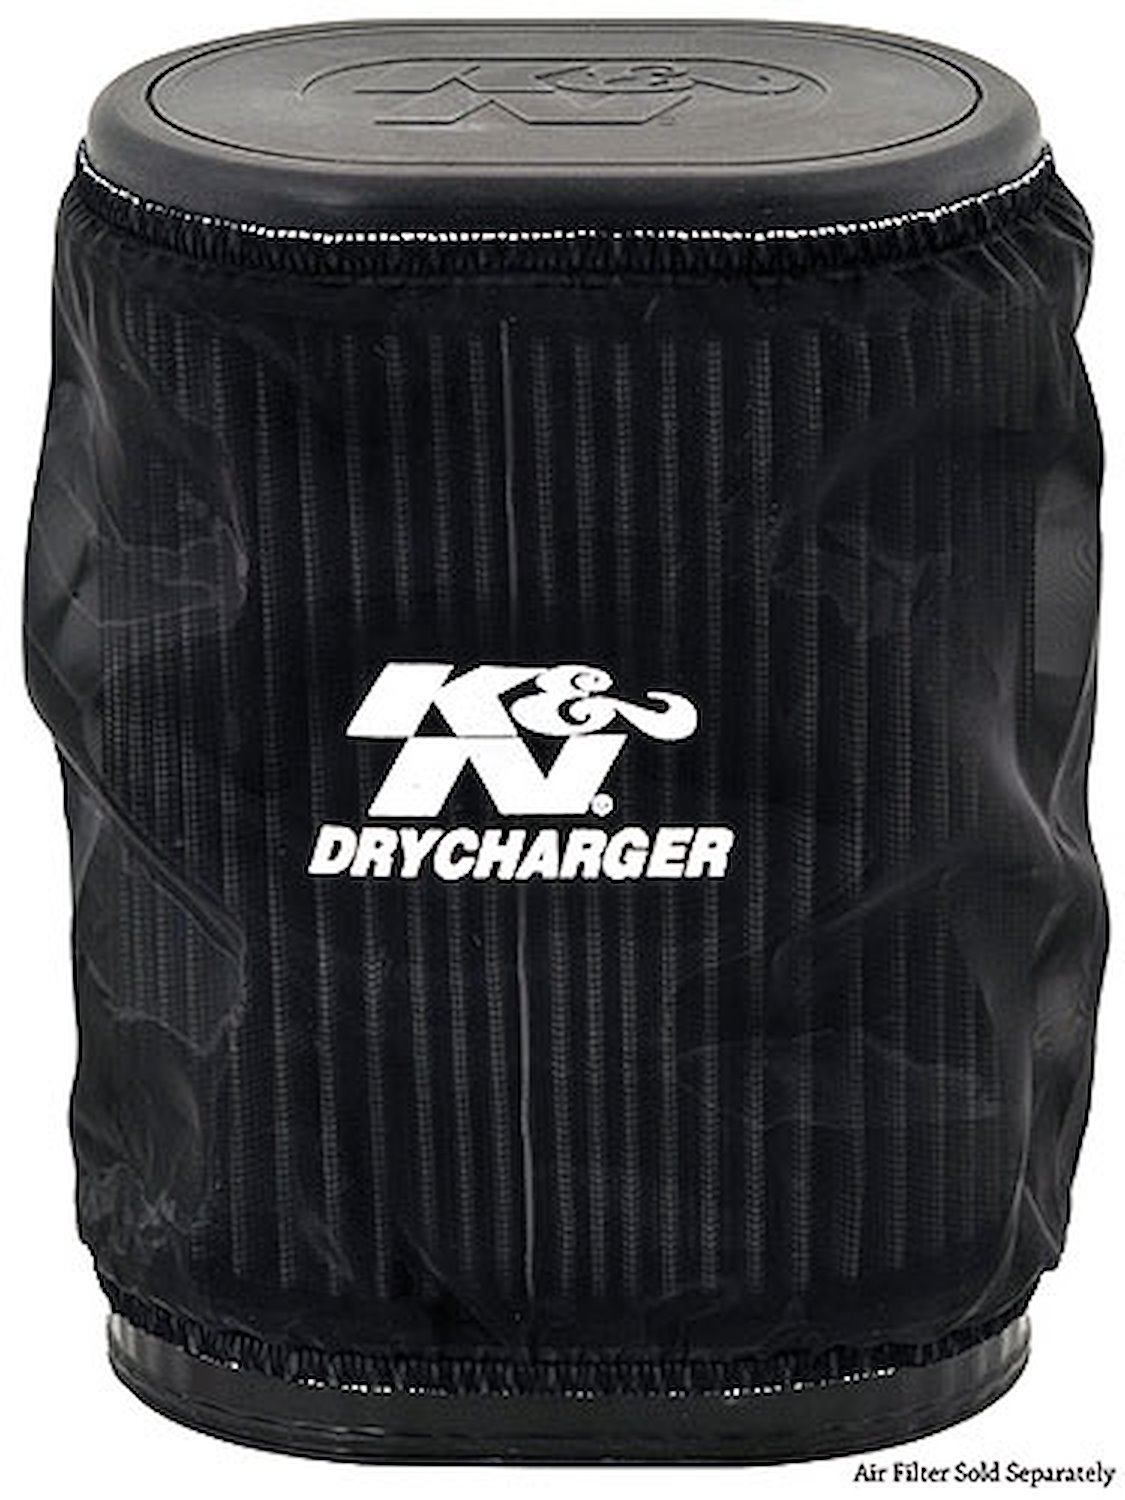 DRY-CHARGER BLACK